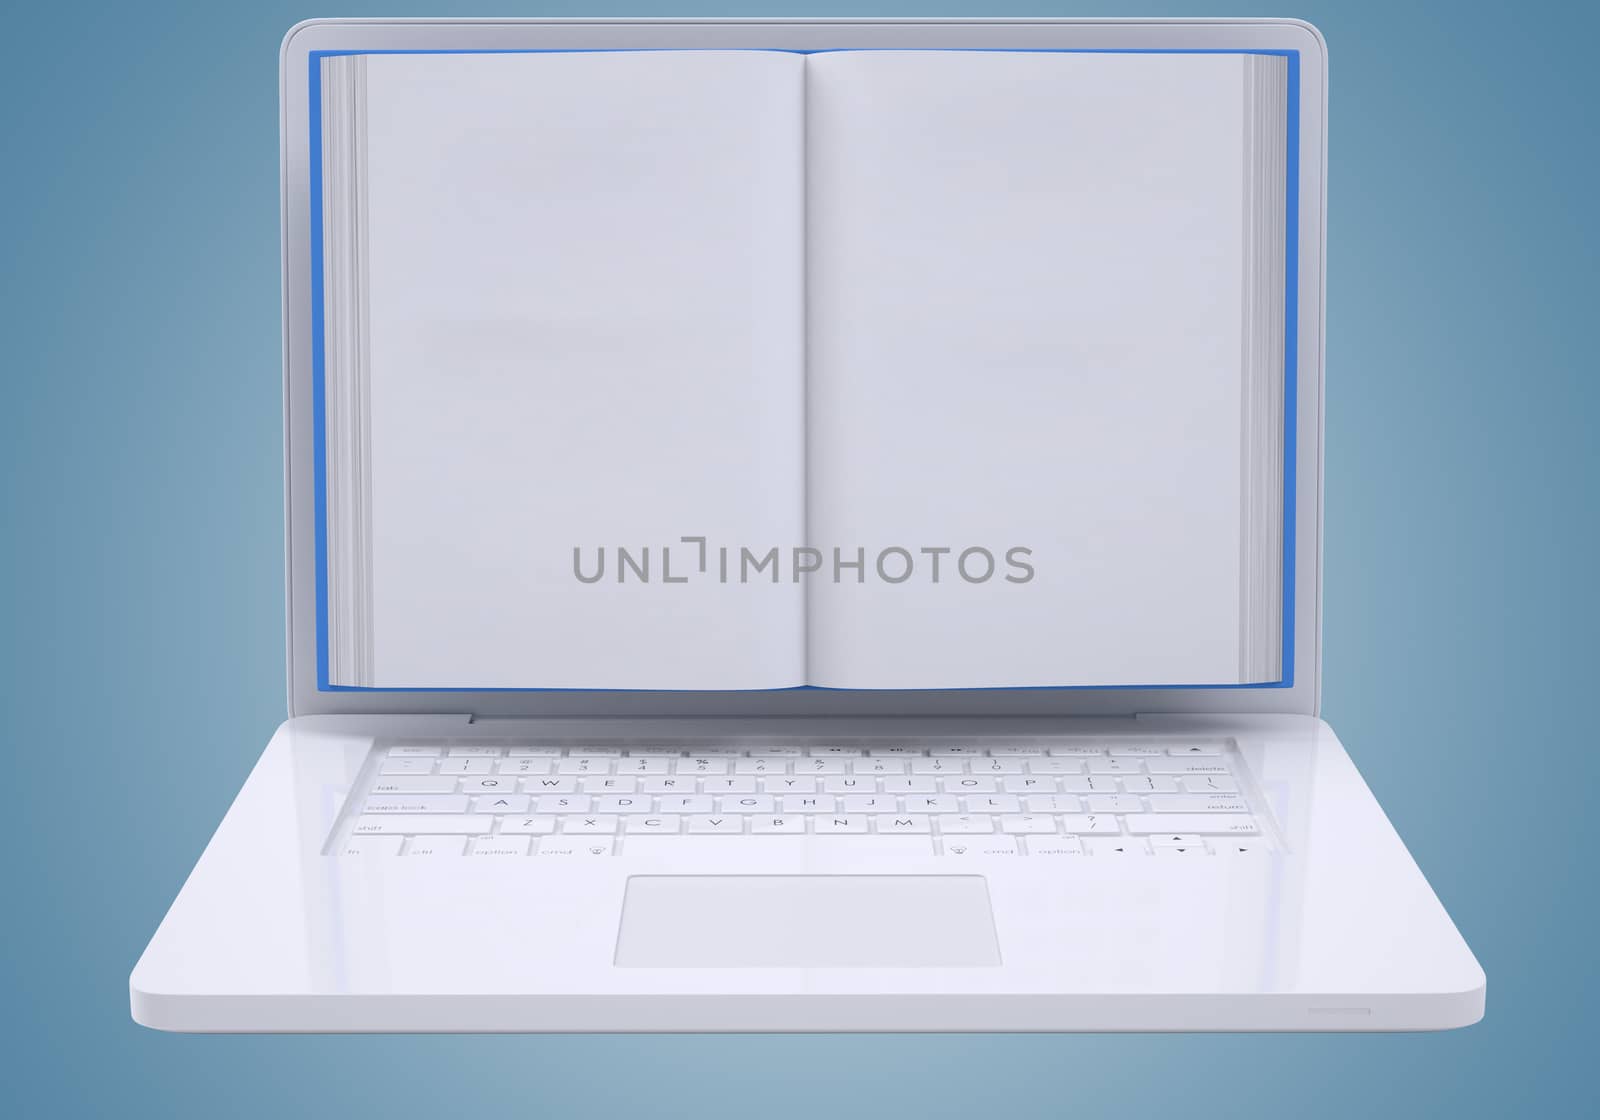 Blank book to screen laptop. The concept of media technologies. Isolated render on a blue background